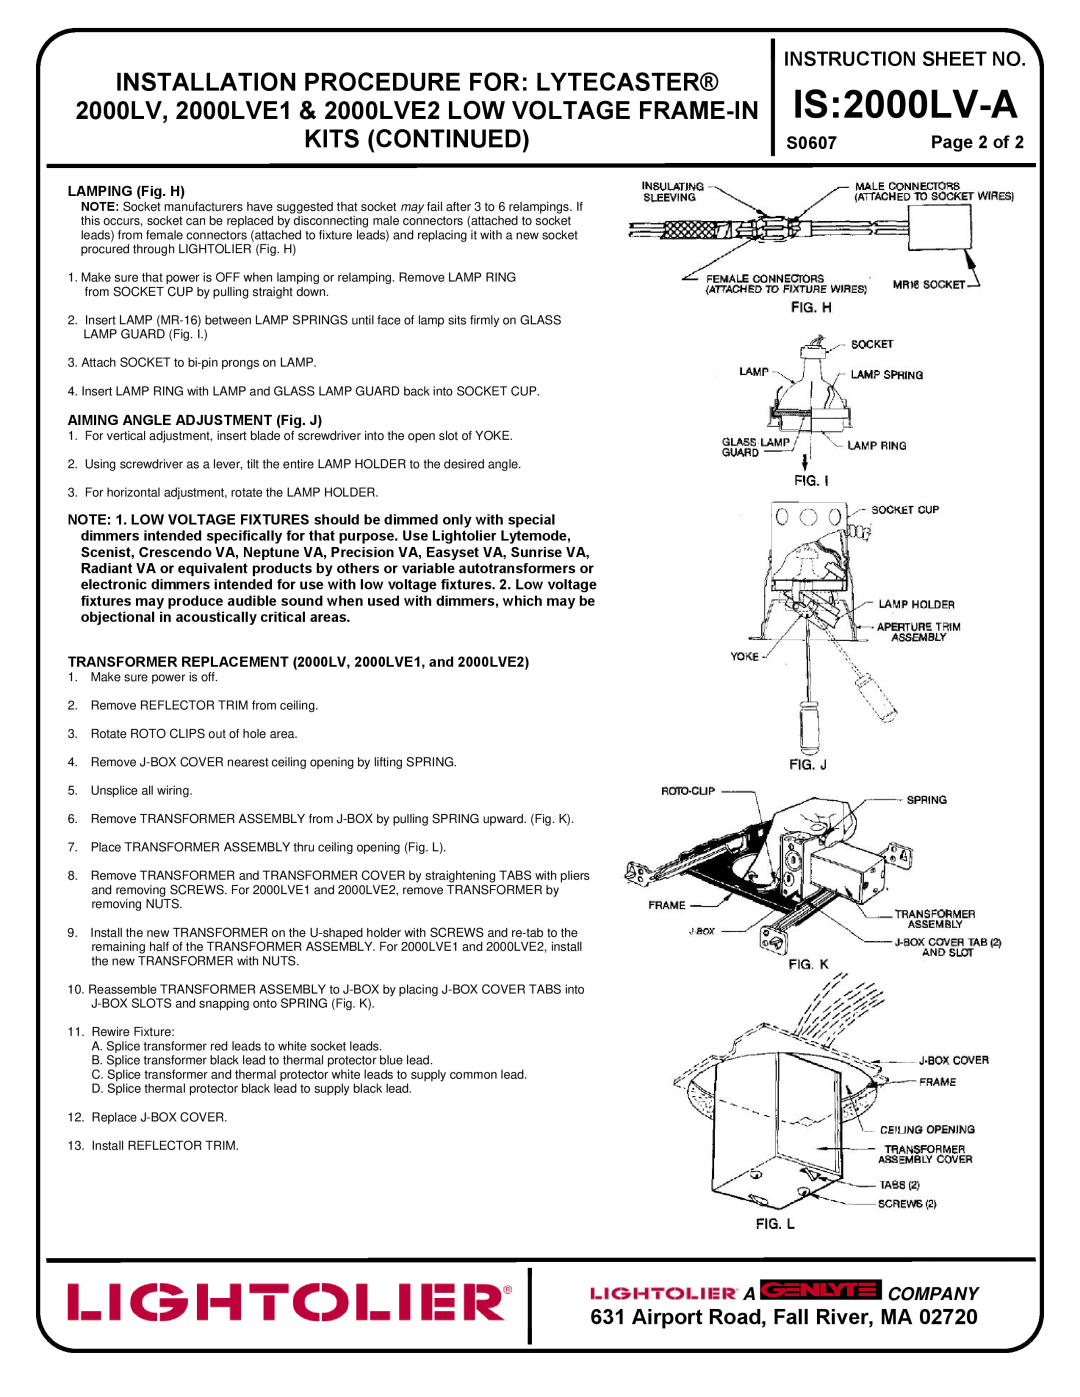 Lightolier IS:2000LV-A Instruction Sheet No, Page 2 of, IS 2000LV-A, Installation Procedure For Lytecaster, Kits Continued 